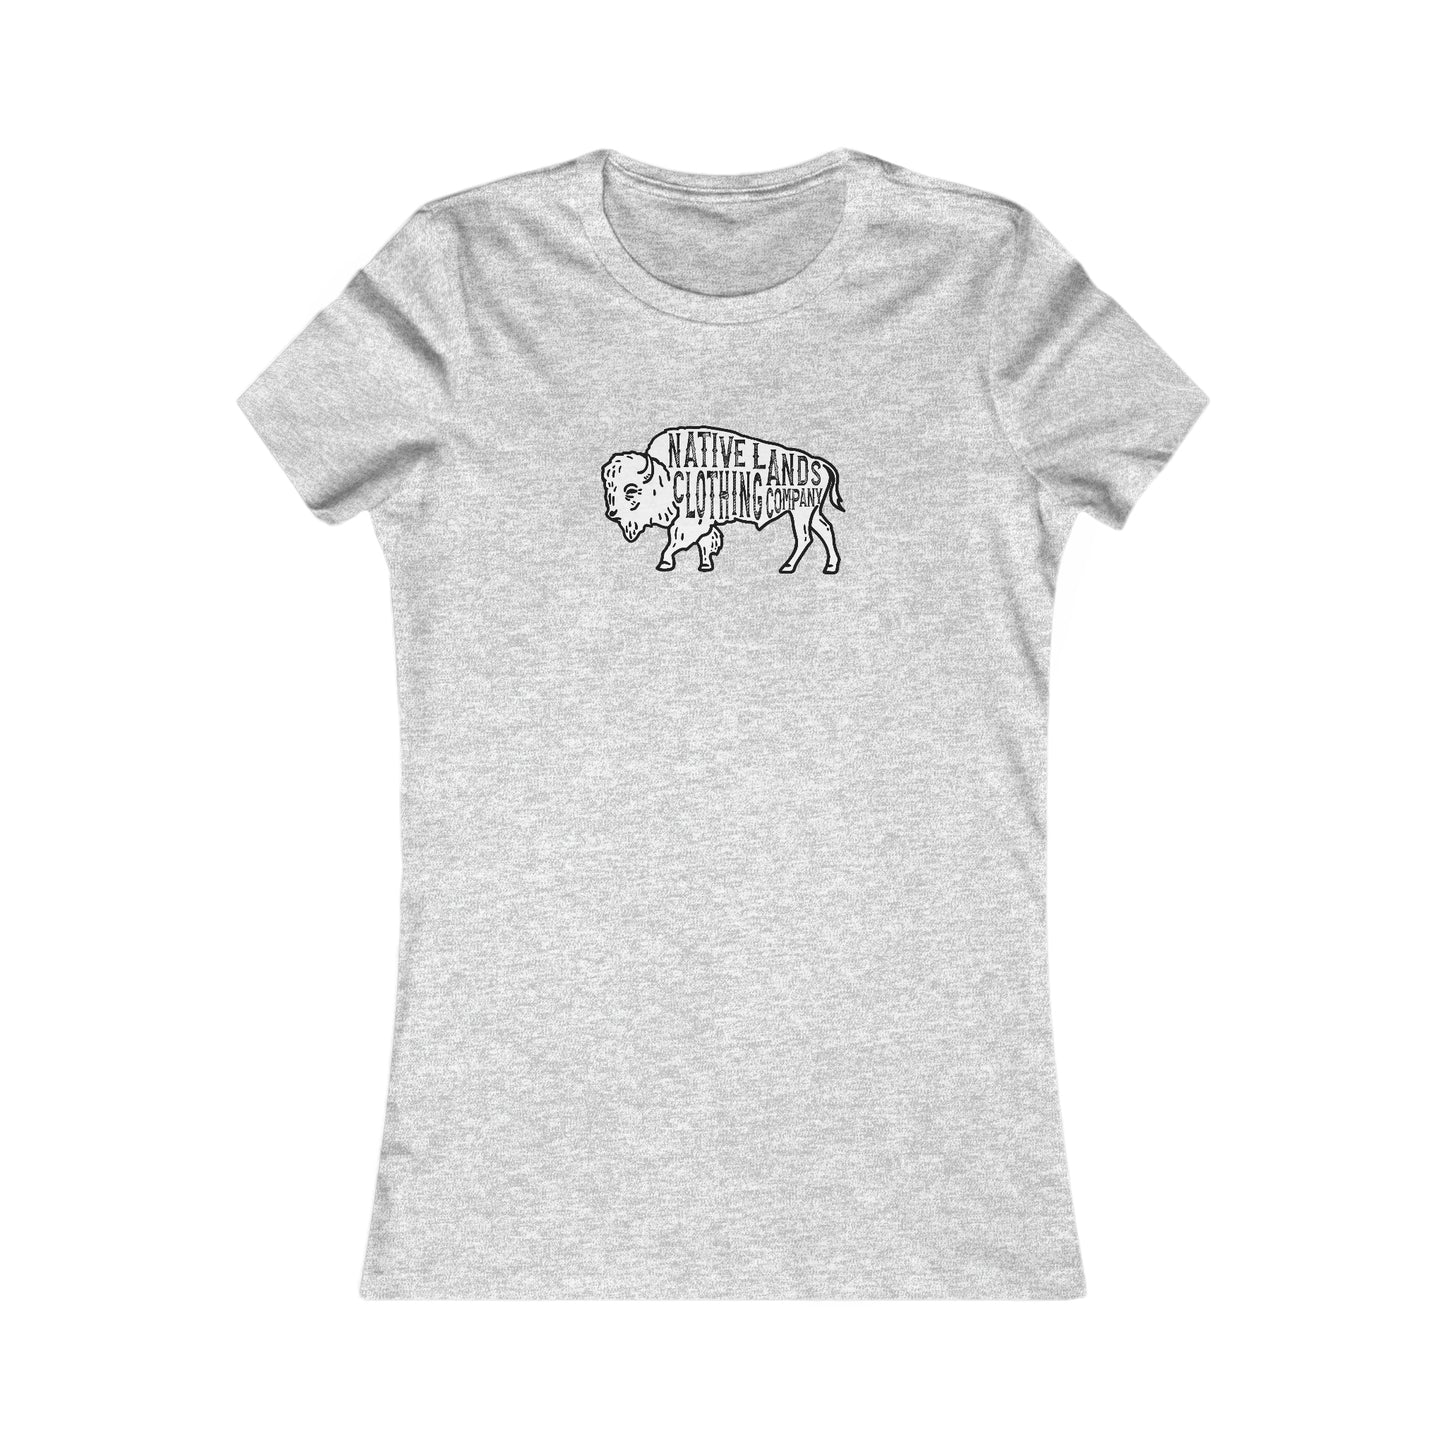 Womens Bison Shirt Cotton  - First Nations, Canadian Aboriginal, Indigenous, Native American